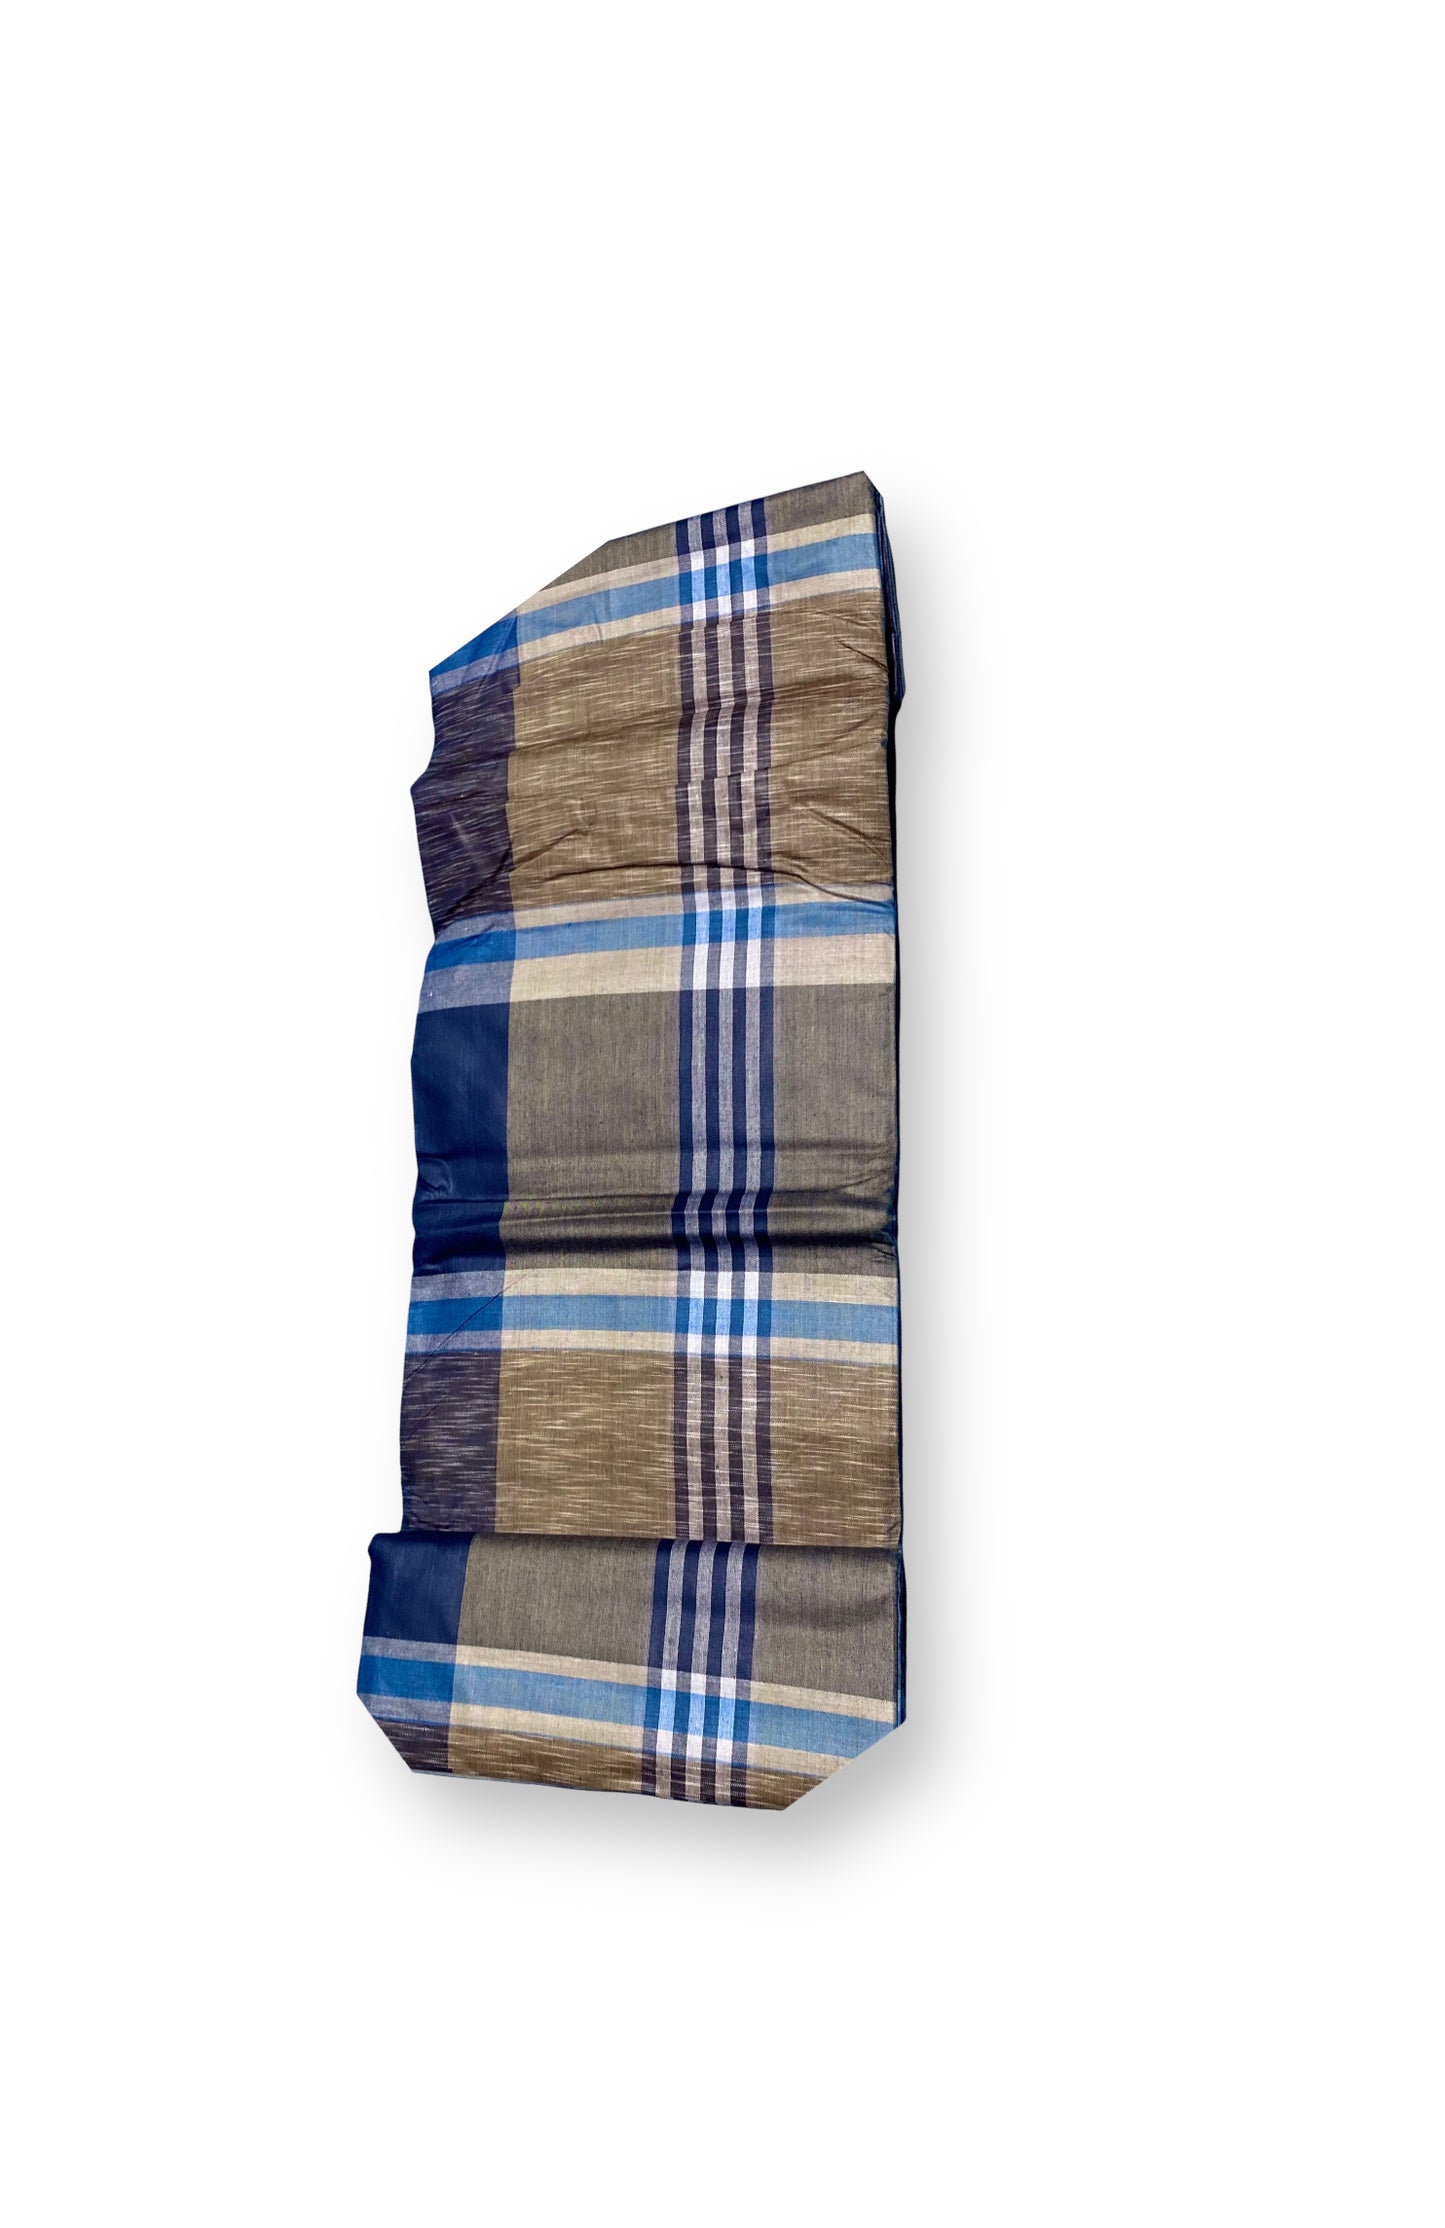 Breezy and Breathable: Cotton Lungi for Ultimate Comfort in Any Season